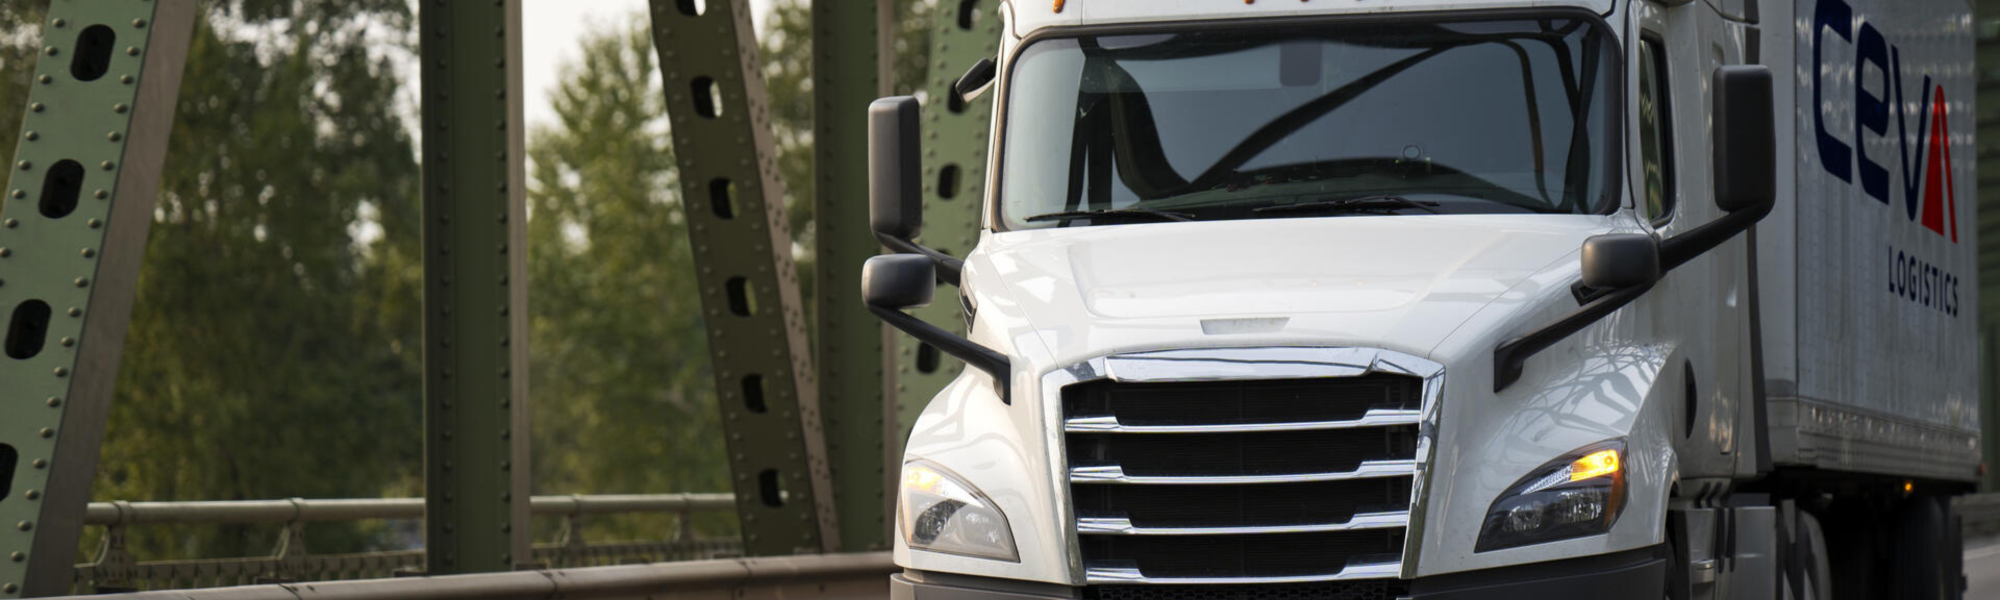 The trucking industry is facing a chronic shortage of drivers. How are companies dealing with it? IRU member CEVA Logistics has turned its focus inward to reduce their exposure to the risks associated with driver shortages.